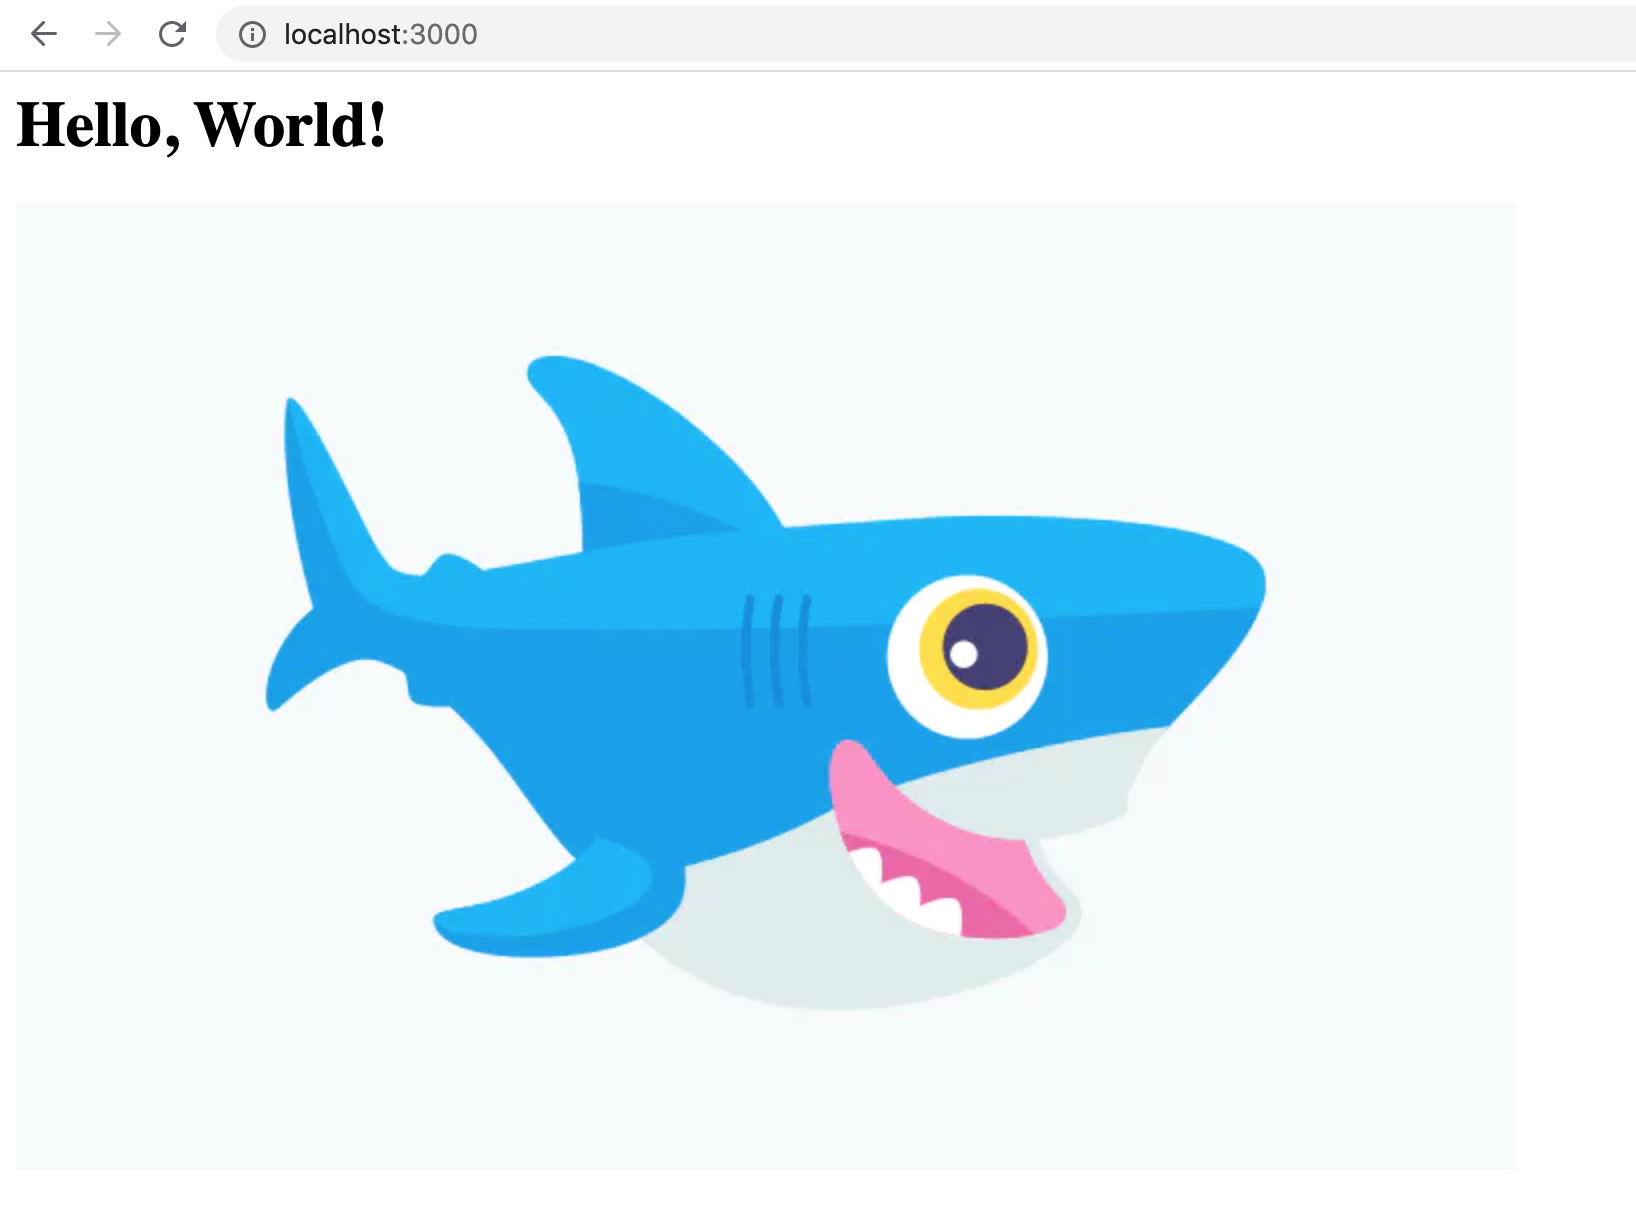 Screenshot of the web page displaying a Hello World message and shark image.